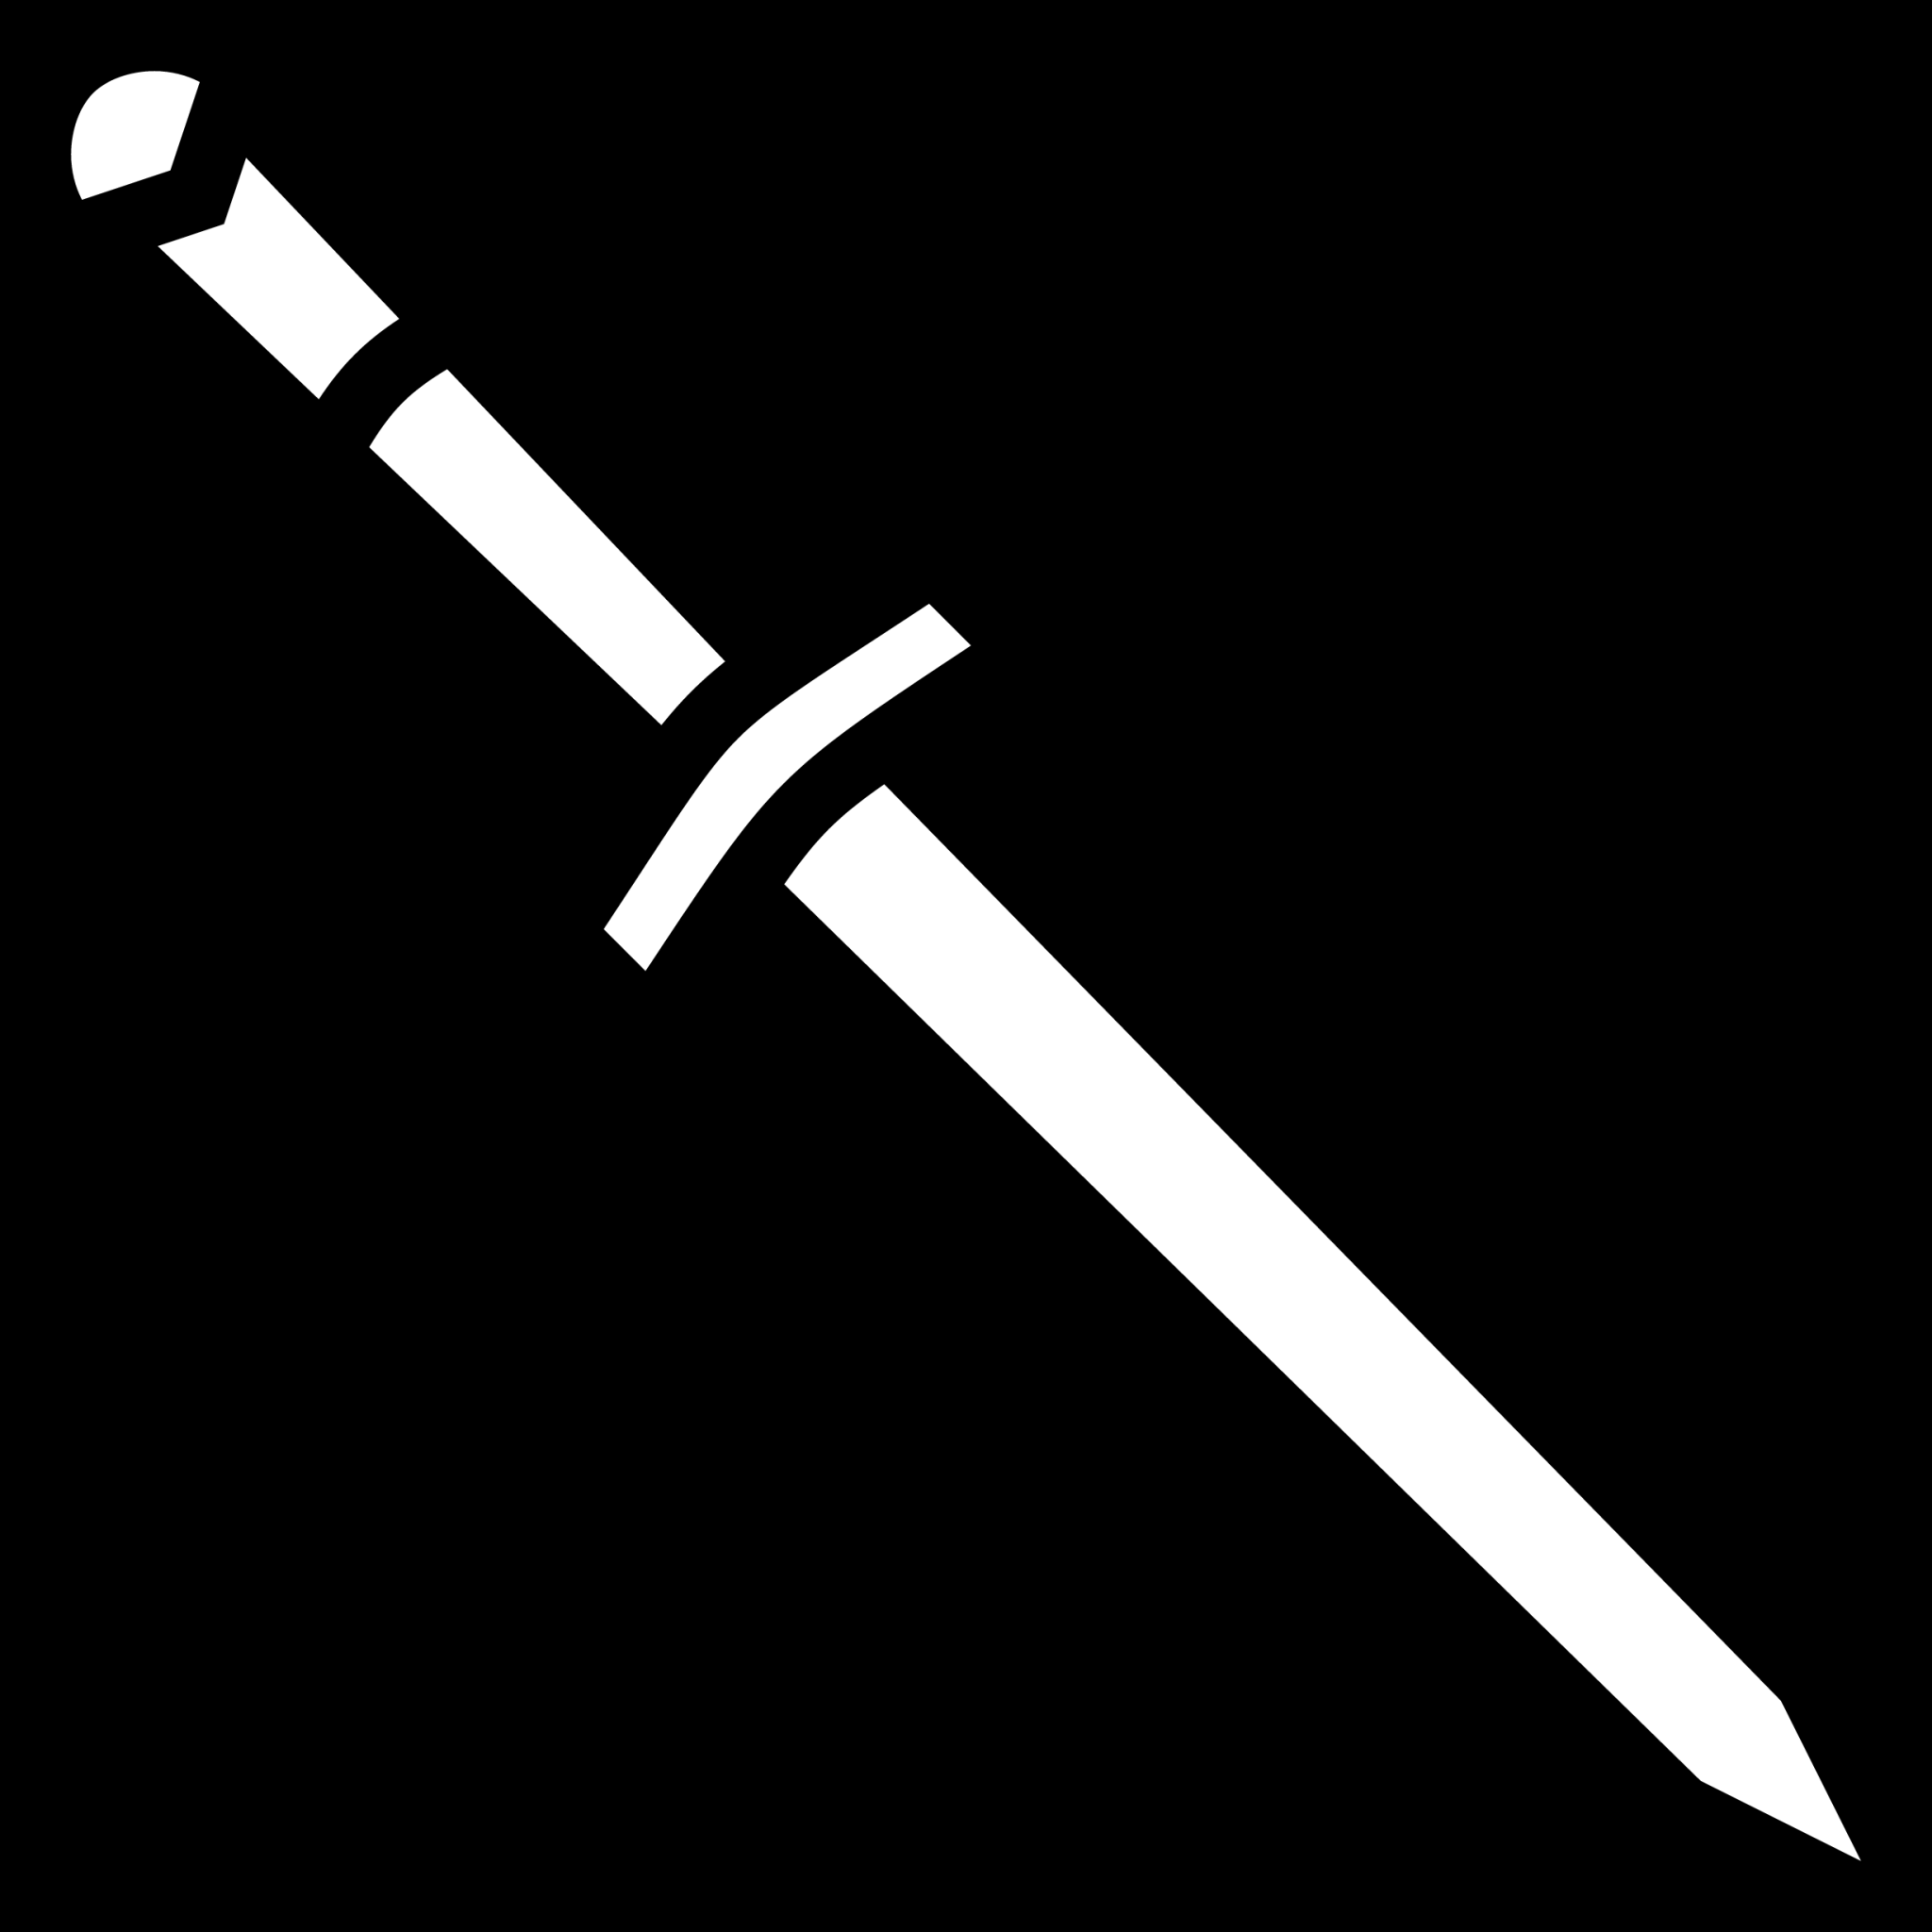 crossed swords Icon - Download for free – Iconduck